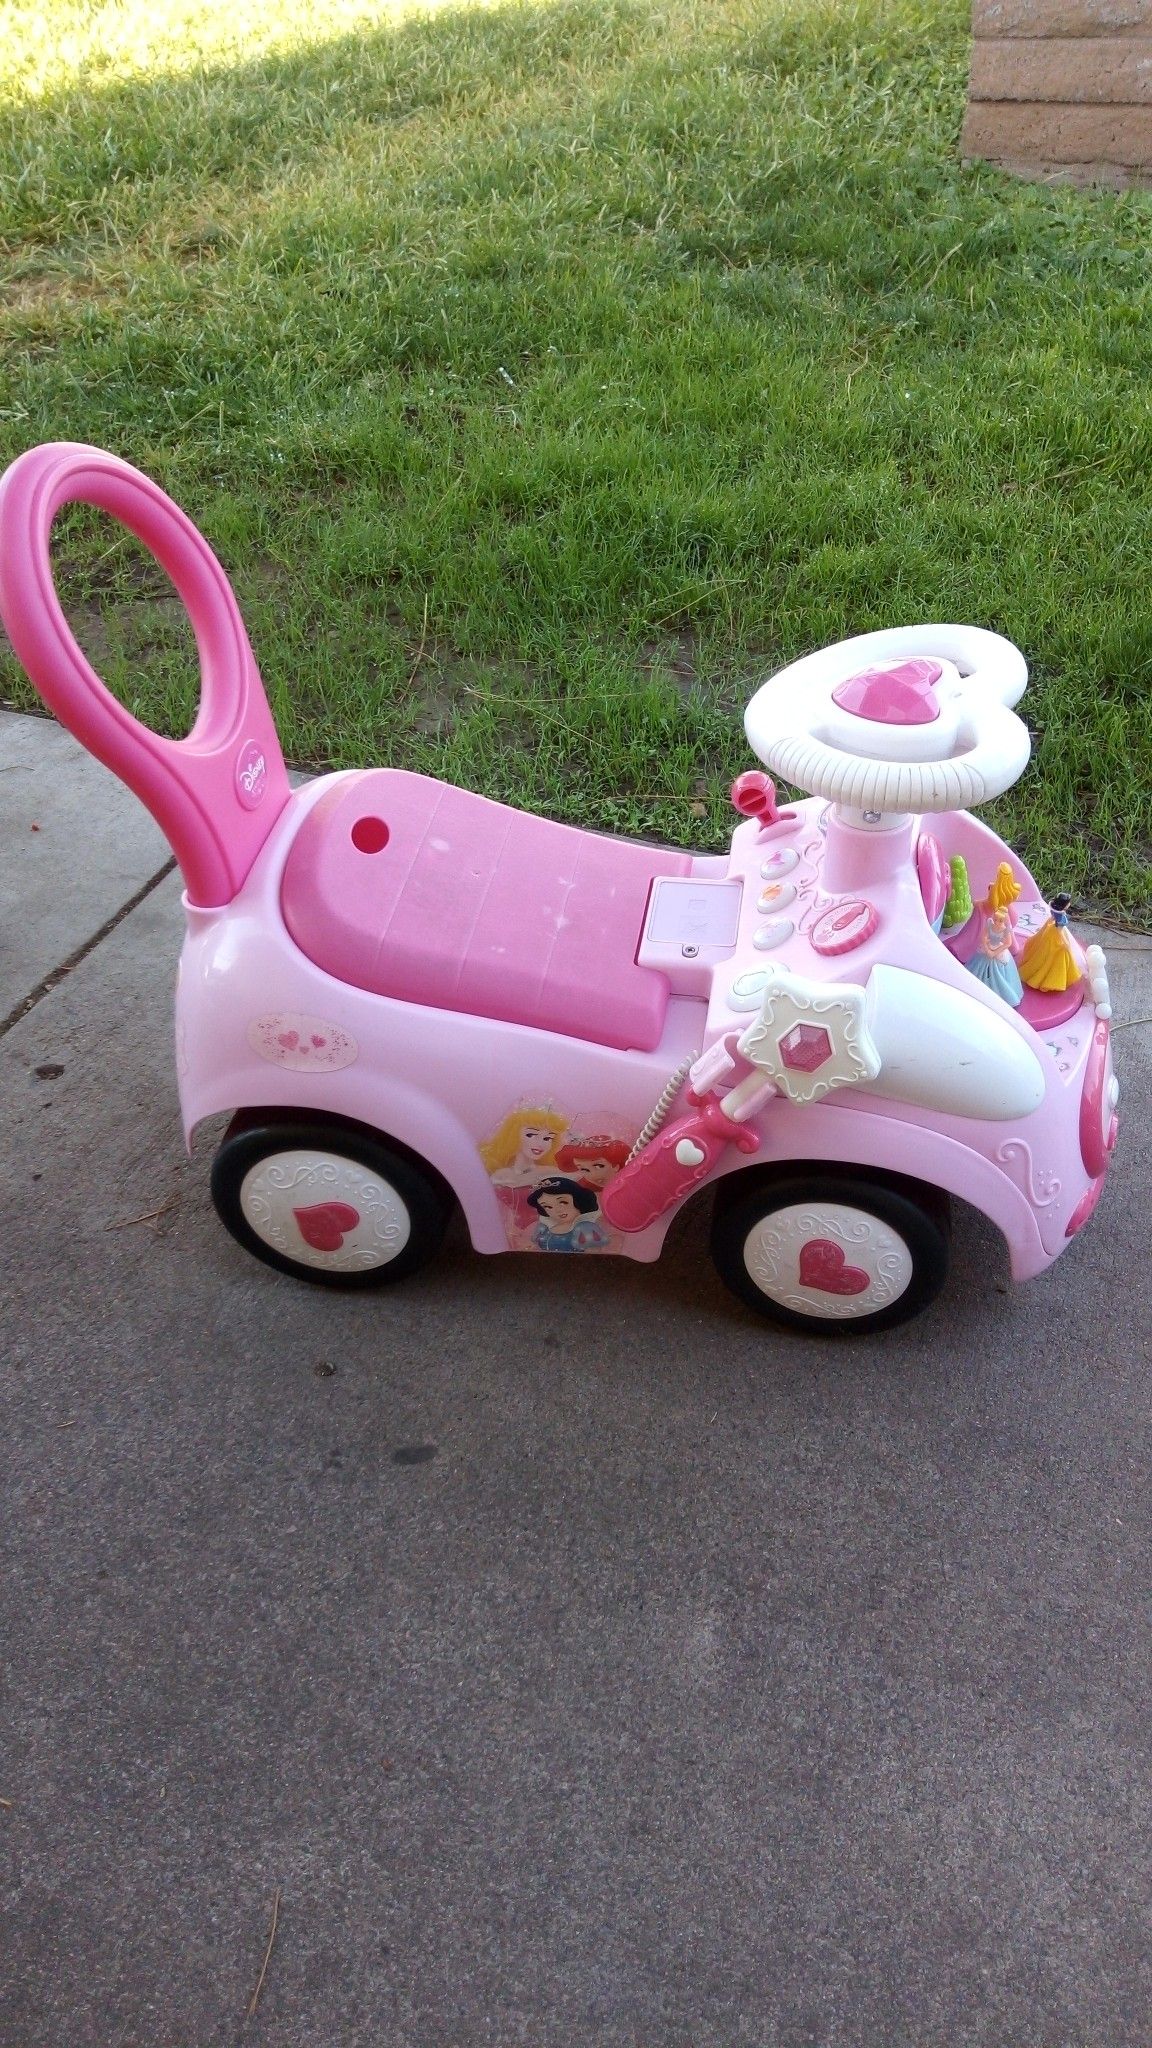 Baby push car ride $15.00 exelent condition 🌺 batteries included